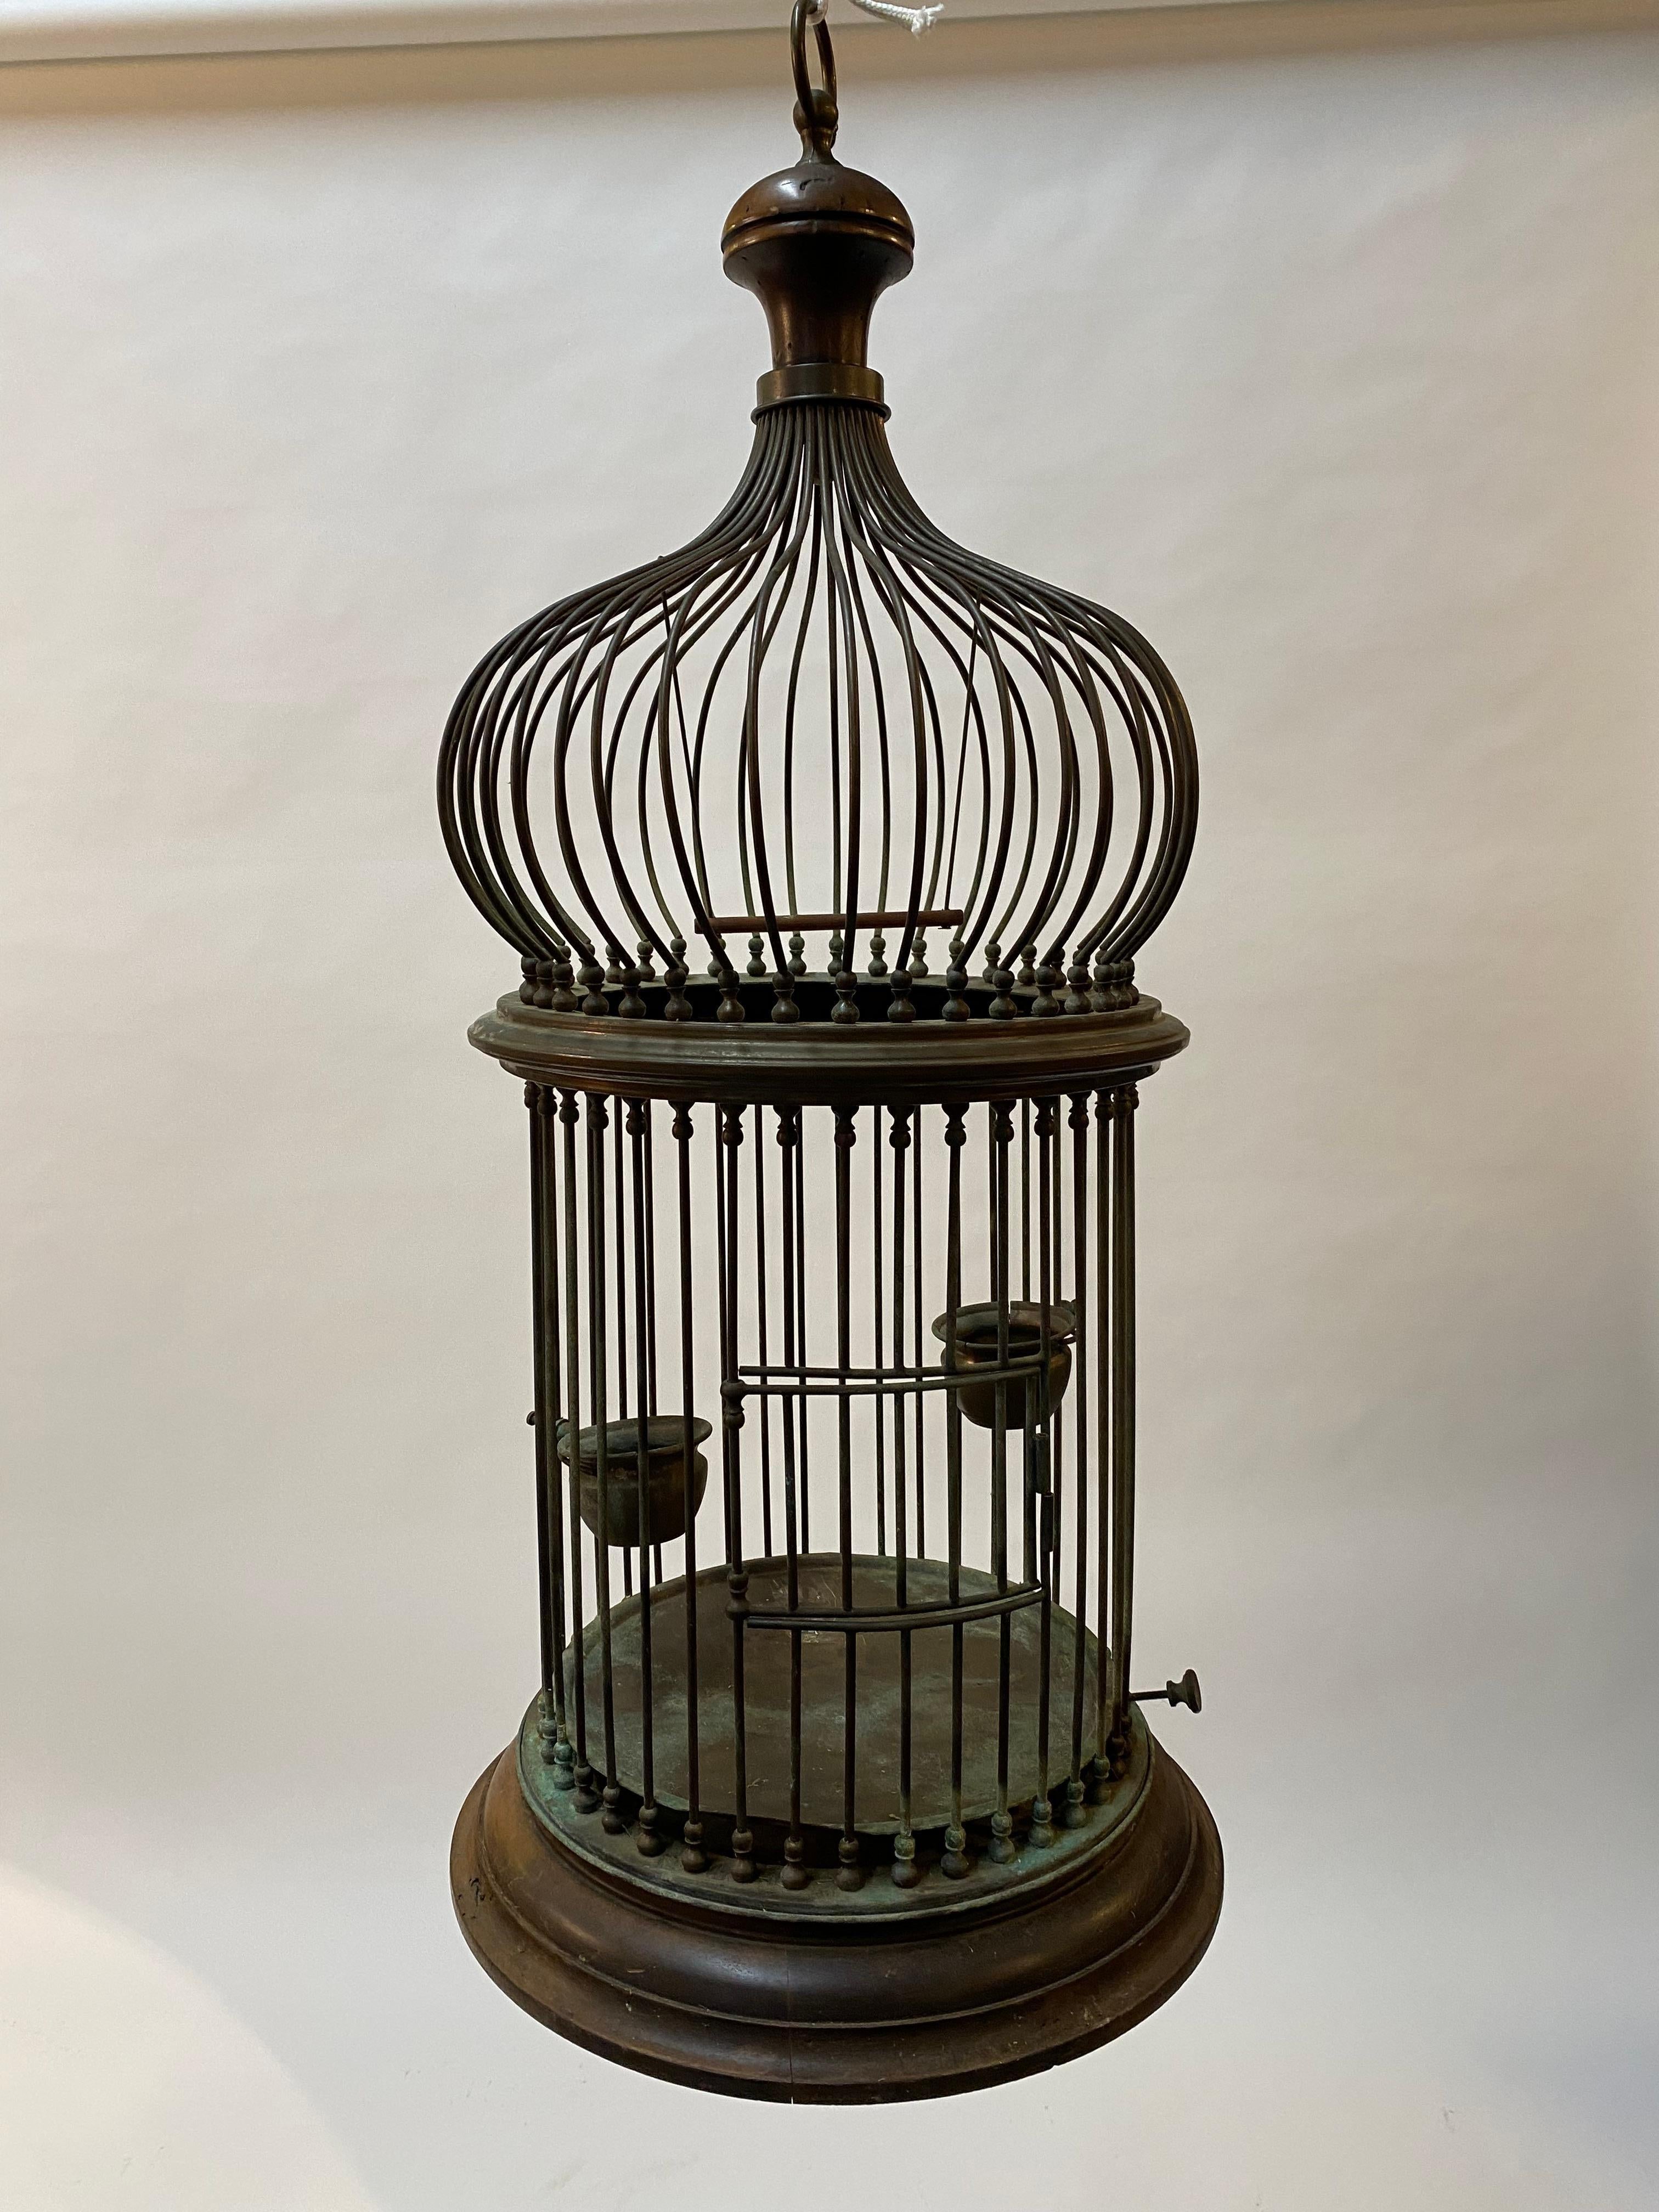 Baroque 1950s Copper and Fruitwood Onion Dome Italian Birdcage